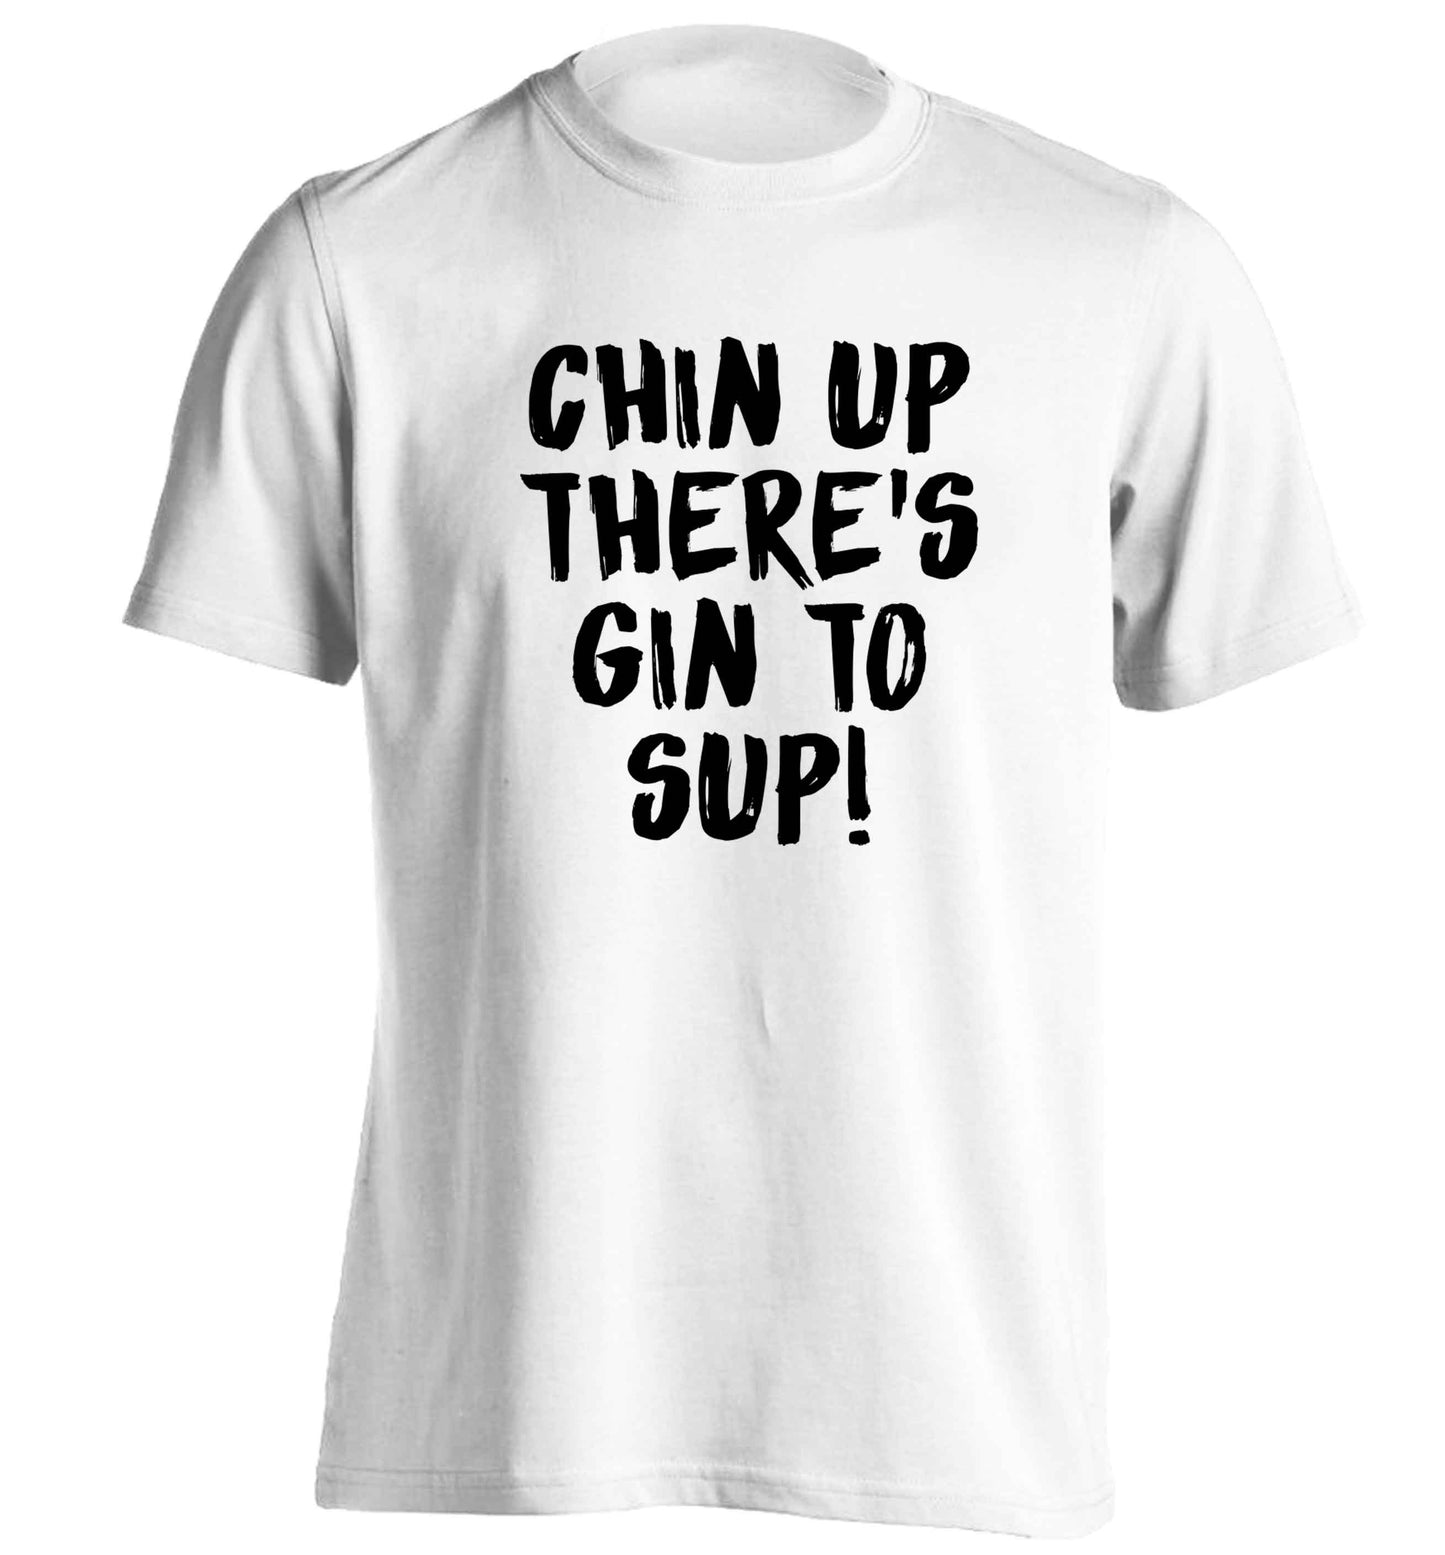 Chin up there's gin to sup adults unisex white Tshirt 2XL